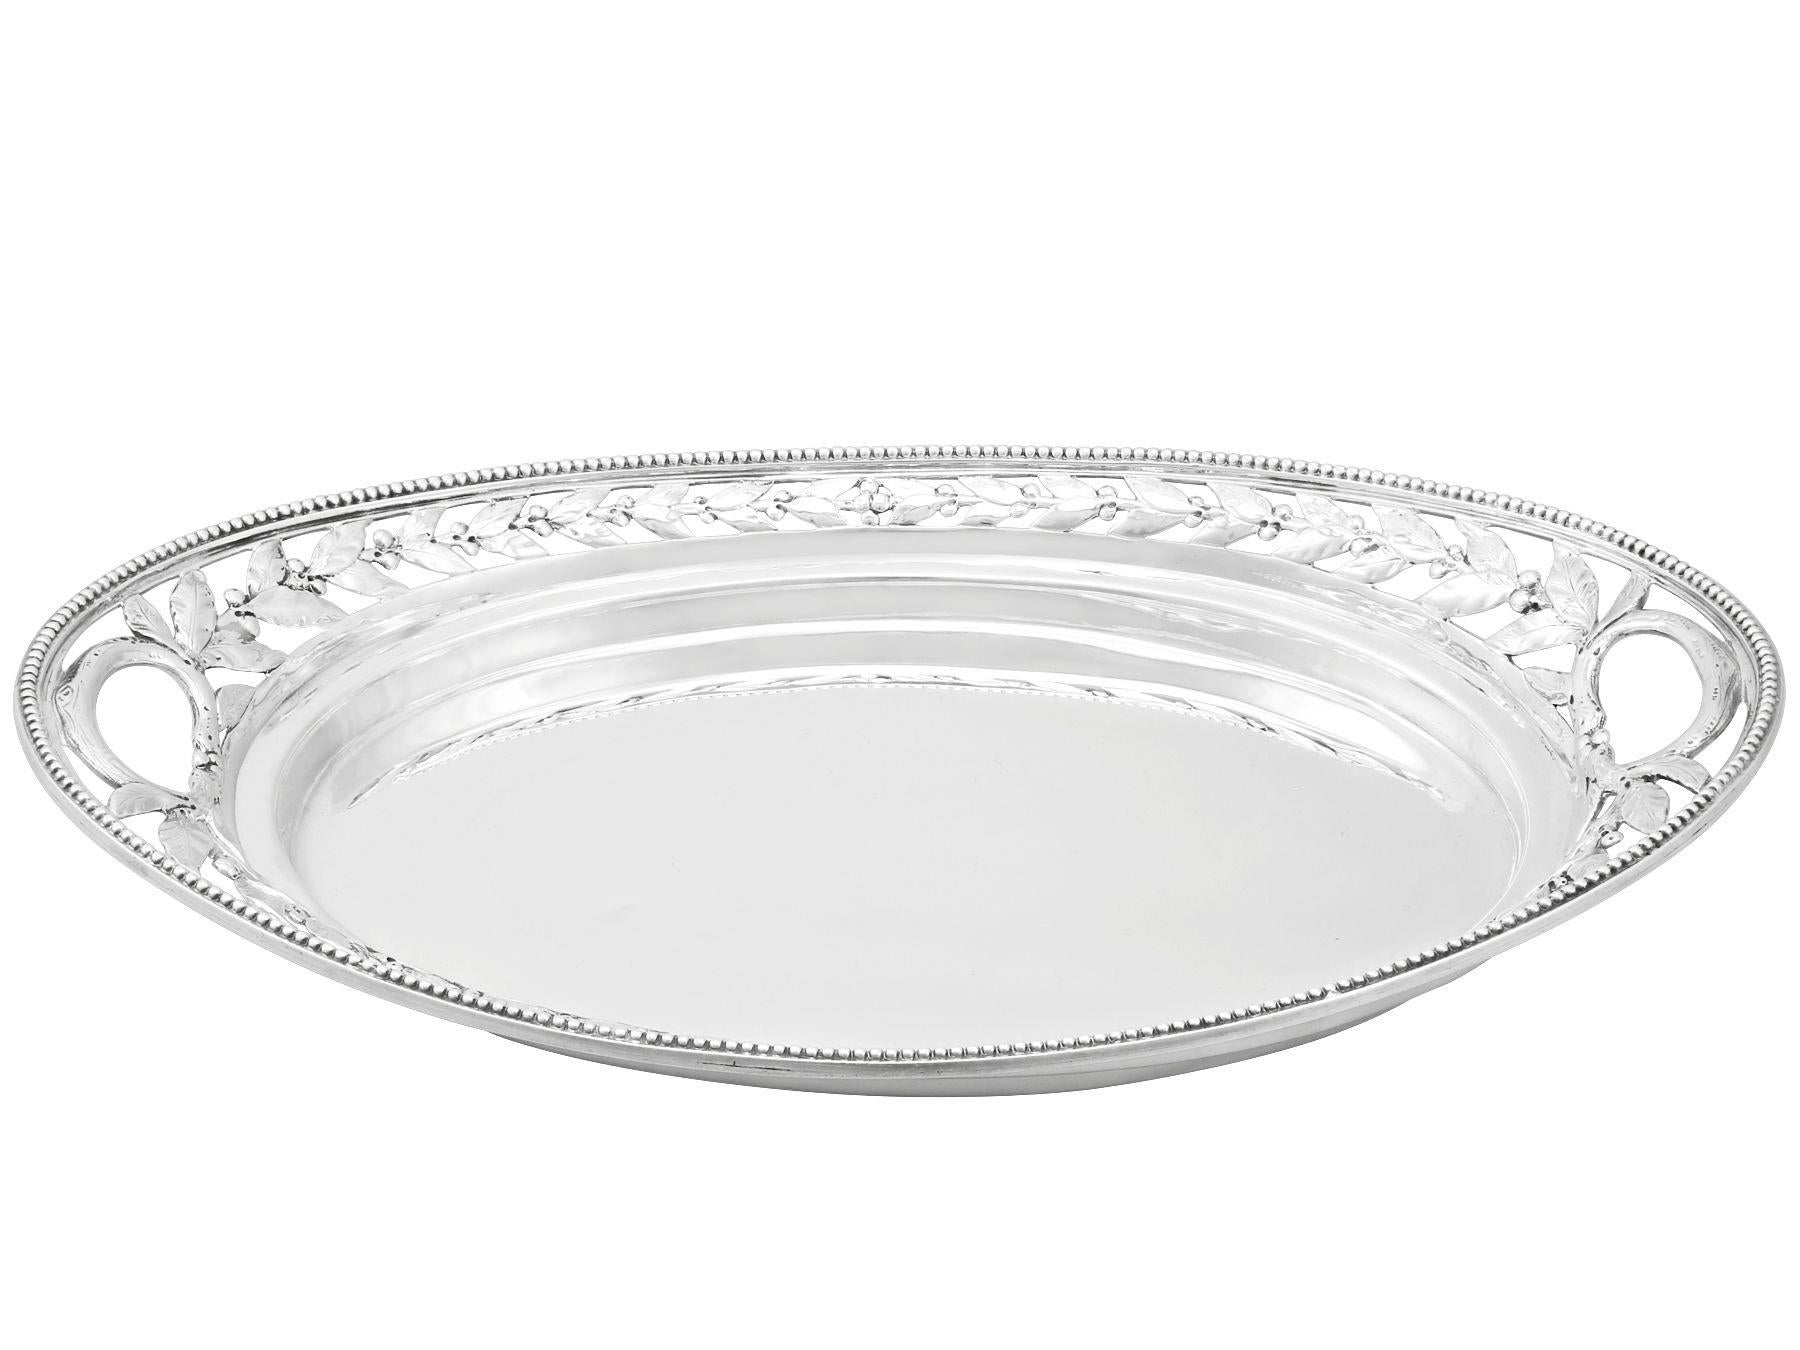 An exceptional, fine and impressive, antique Victorian English sterling silver galleried drinks tray, an addition to our Victorian teaware collection

This exceptional antique sterling silver drinks tray has a plain oval form.

The surface of this